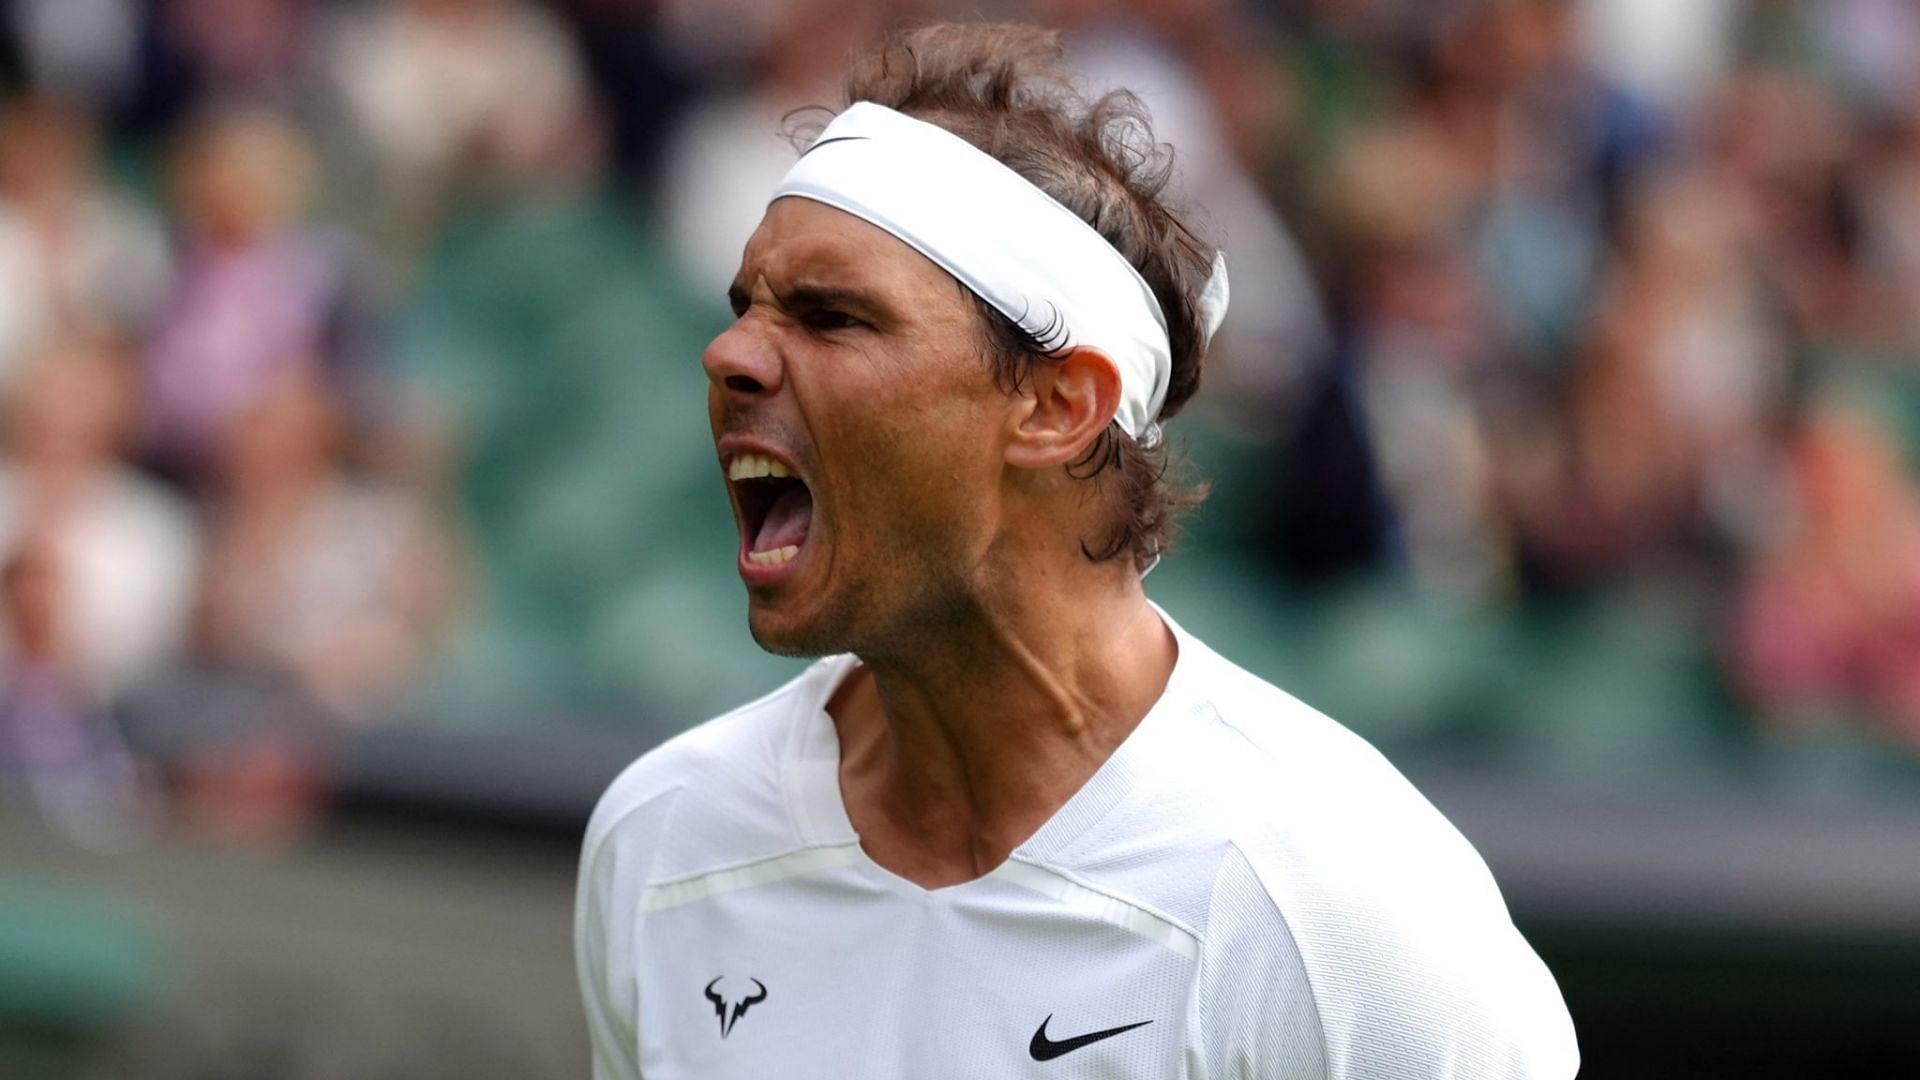 Rafael Nadal will start as the favorite to reach a 5th SW19 final if he recovers from his abdominal injury